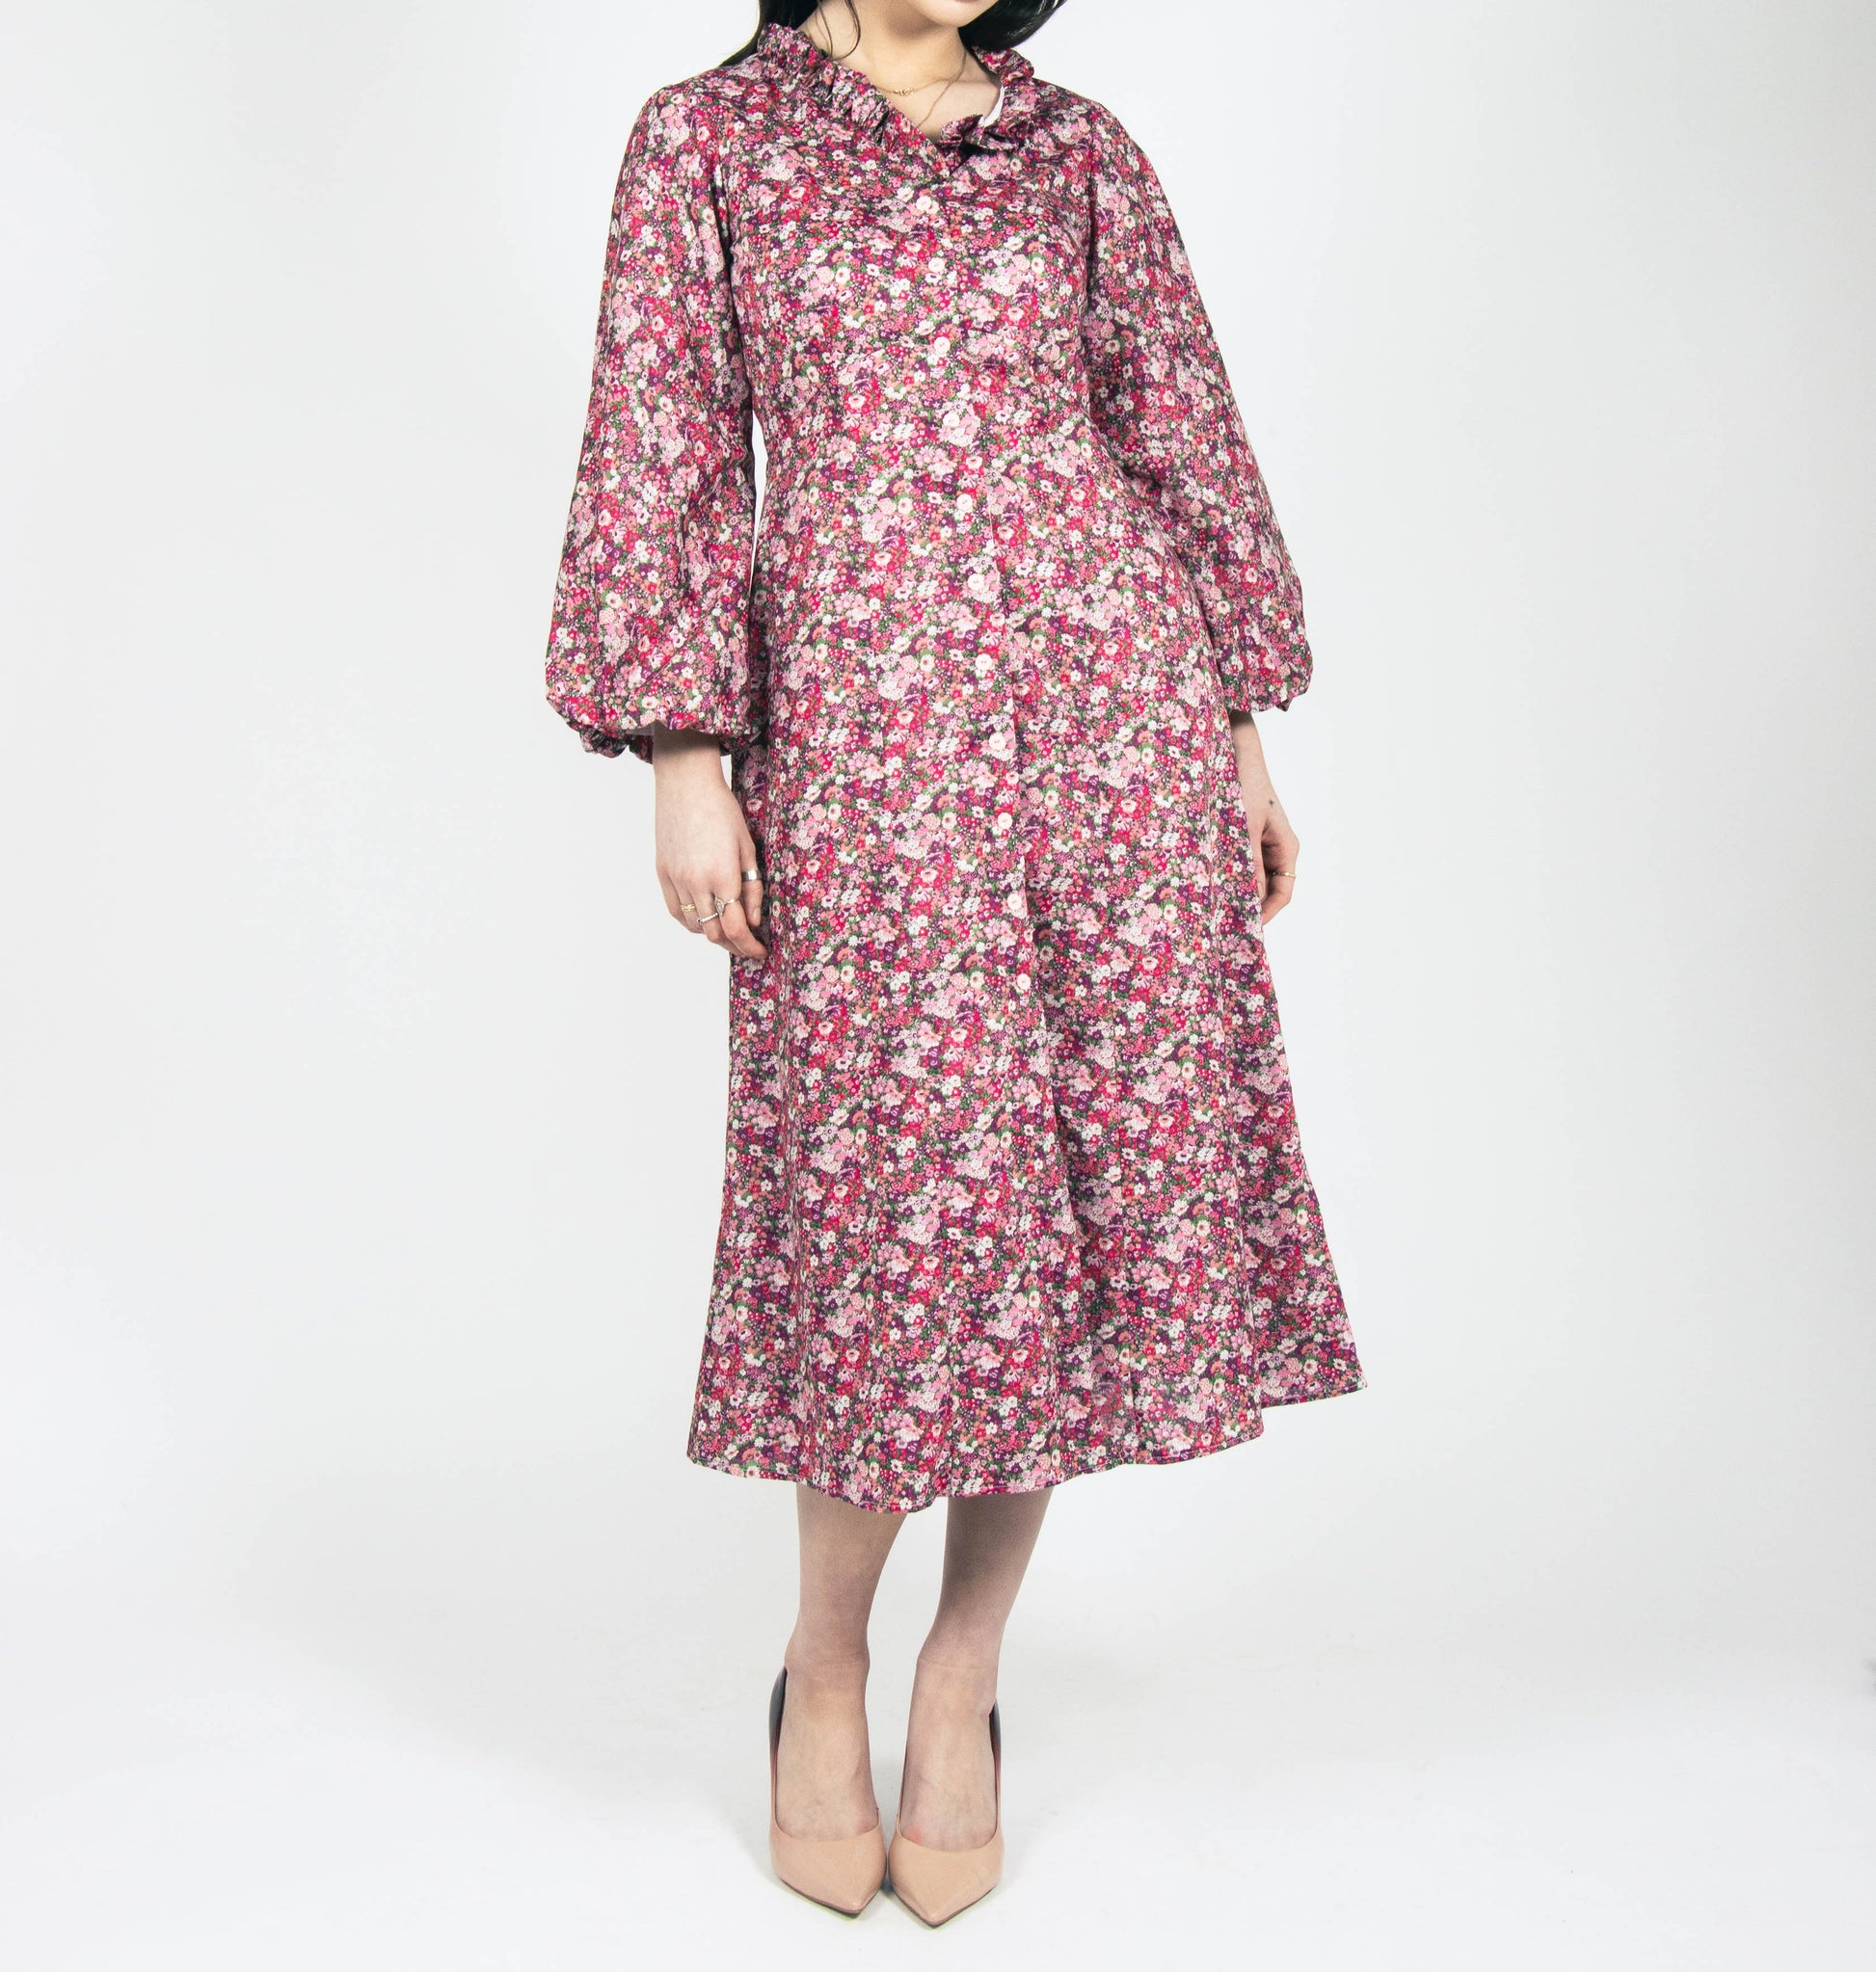 pink and purple ditsy floral midi dress fully lined cotton printed liberty london bubble sleeves and ruffle collar made in ireland fashion womens occasion wear 